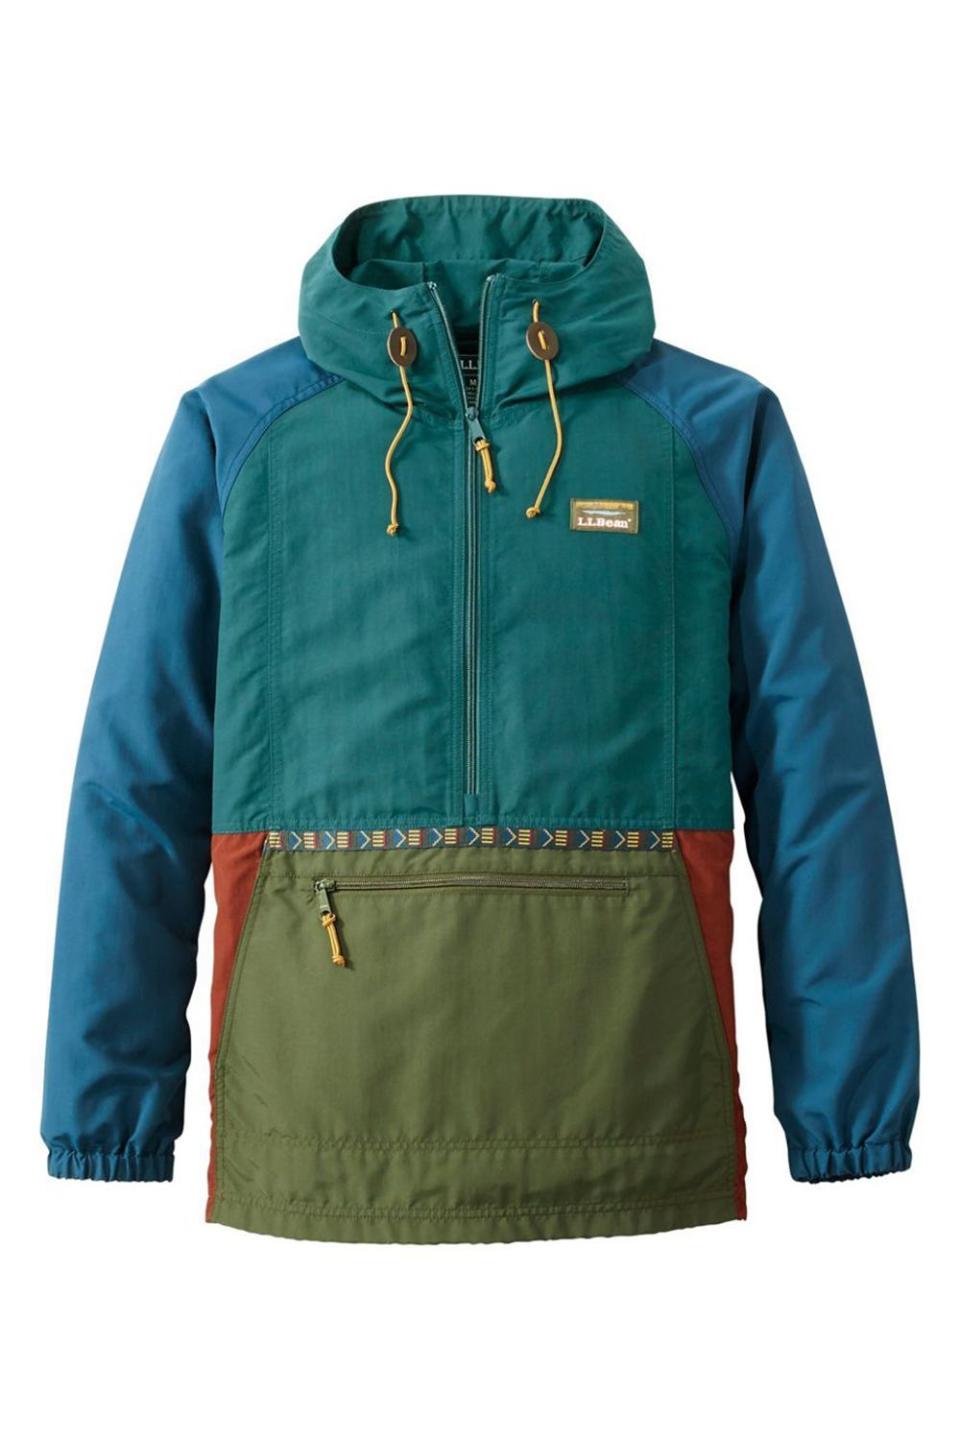 <p><strong>L.L. Bean</strong></p><p>llbean.com</p><p><strong>$59.00</strong></p><p><a href="https://go.redirectingat.com?id=74968X1596630&url=https%3A%2F%2Fwww.llbean.com%2Fllb%2Fshop%2F120880%3Fpage%3Dmens-mountain-classic-anorak-multi-color-mens-regular%26bc%3D12-26%26feat%3D26-GN0%26csp%3Df%26pos%3D20&sref=https%3A%2F%2Fwww.oprahdaily.com%2Flife%2Frelationships-love%2Fg26825396%2Fgifts-for-dad%2F" rel="nofollow noopener" target="_blank" data-ylk="slk:Shop Now" class="link ">Shop Now</a></p><p>Bet you didn’t know a rain jacket could define cool. This one doesn’t fail to deliver thanks to a sleek, modern fit and fun heritage-inspired details. Of course, it’s also highly functional—it has a wind- and water-resistant supplex fabric, elastic cuffs, and an adjustable drawcord hem.</p>